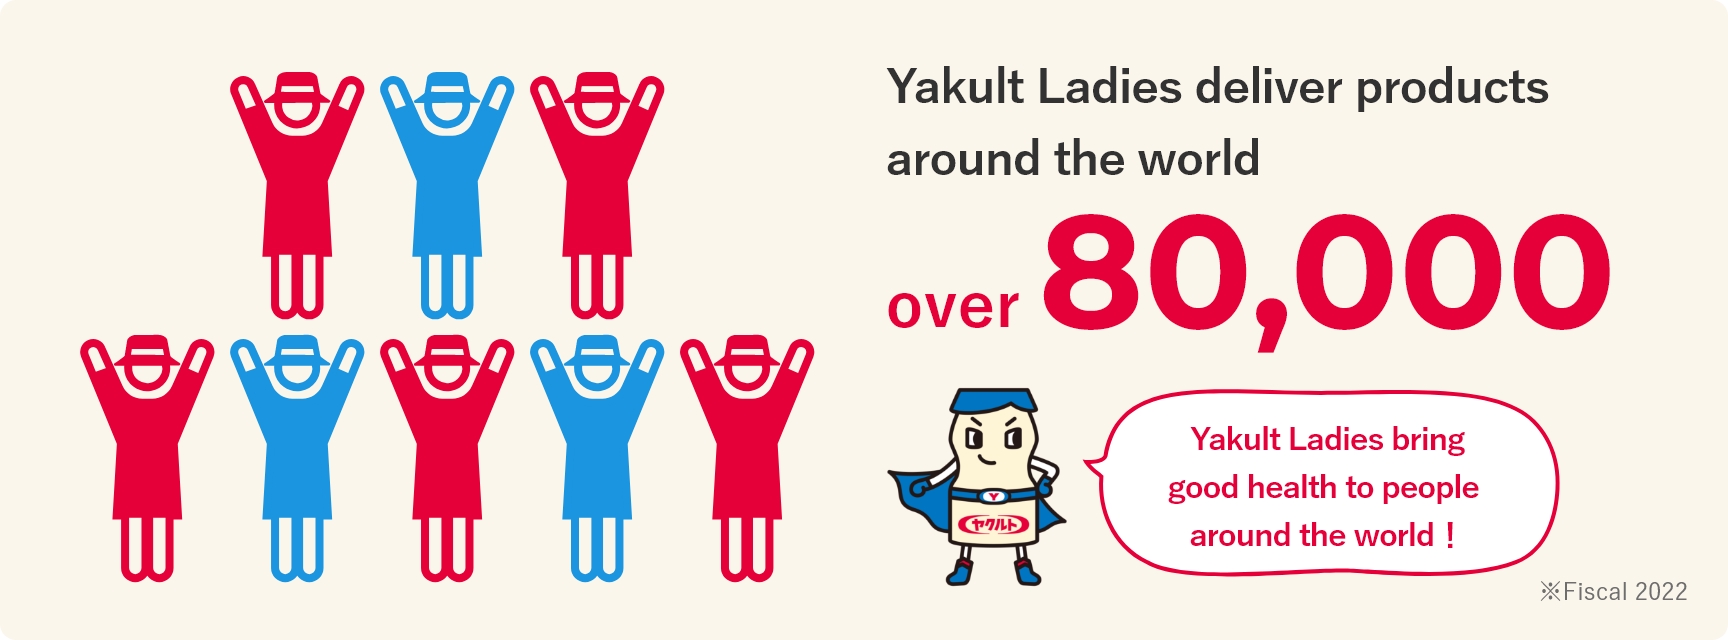 Yakult Ladies deliver products around the world